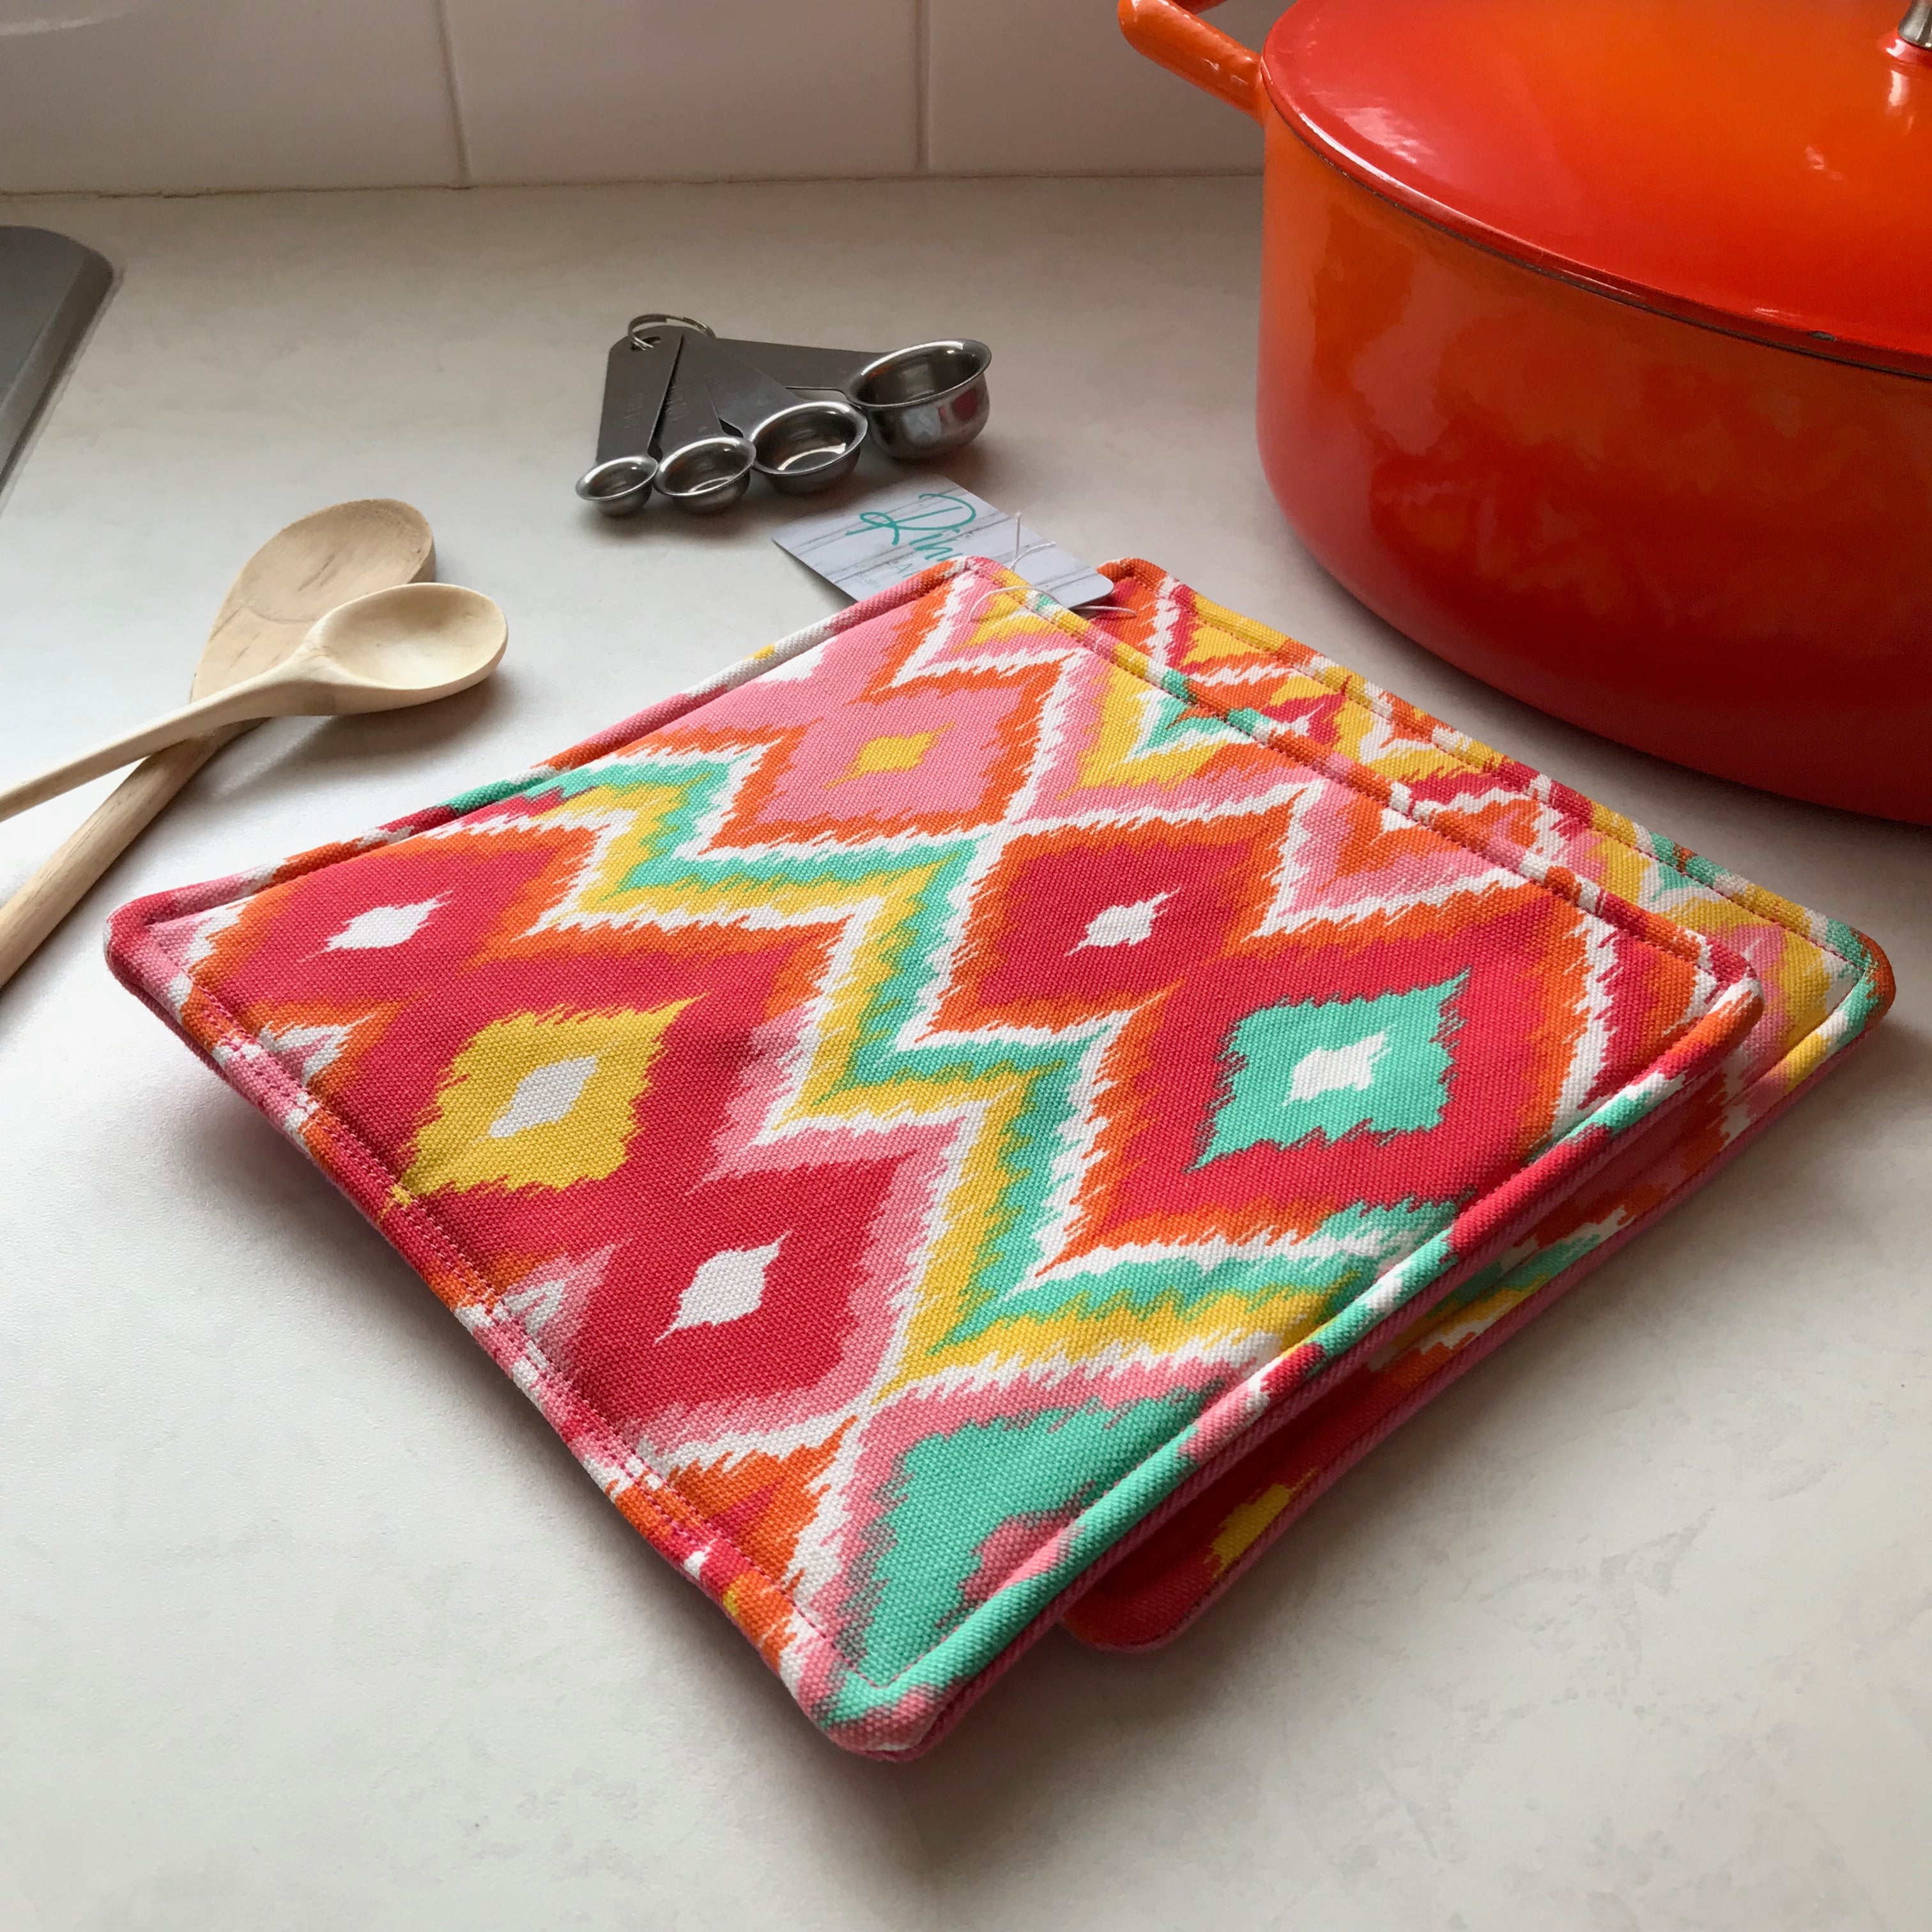 Heavy duty Hotpad Set coral pink, orange, red, white, yellow, mint print, pink denim backing